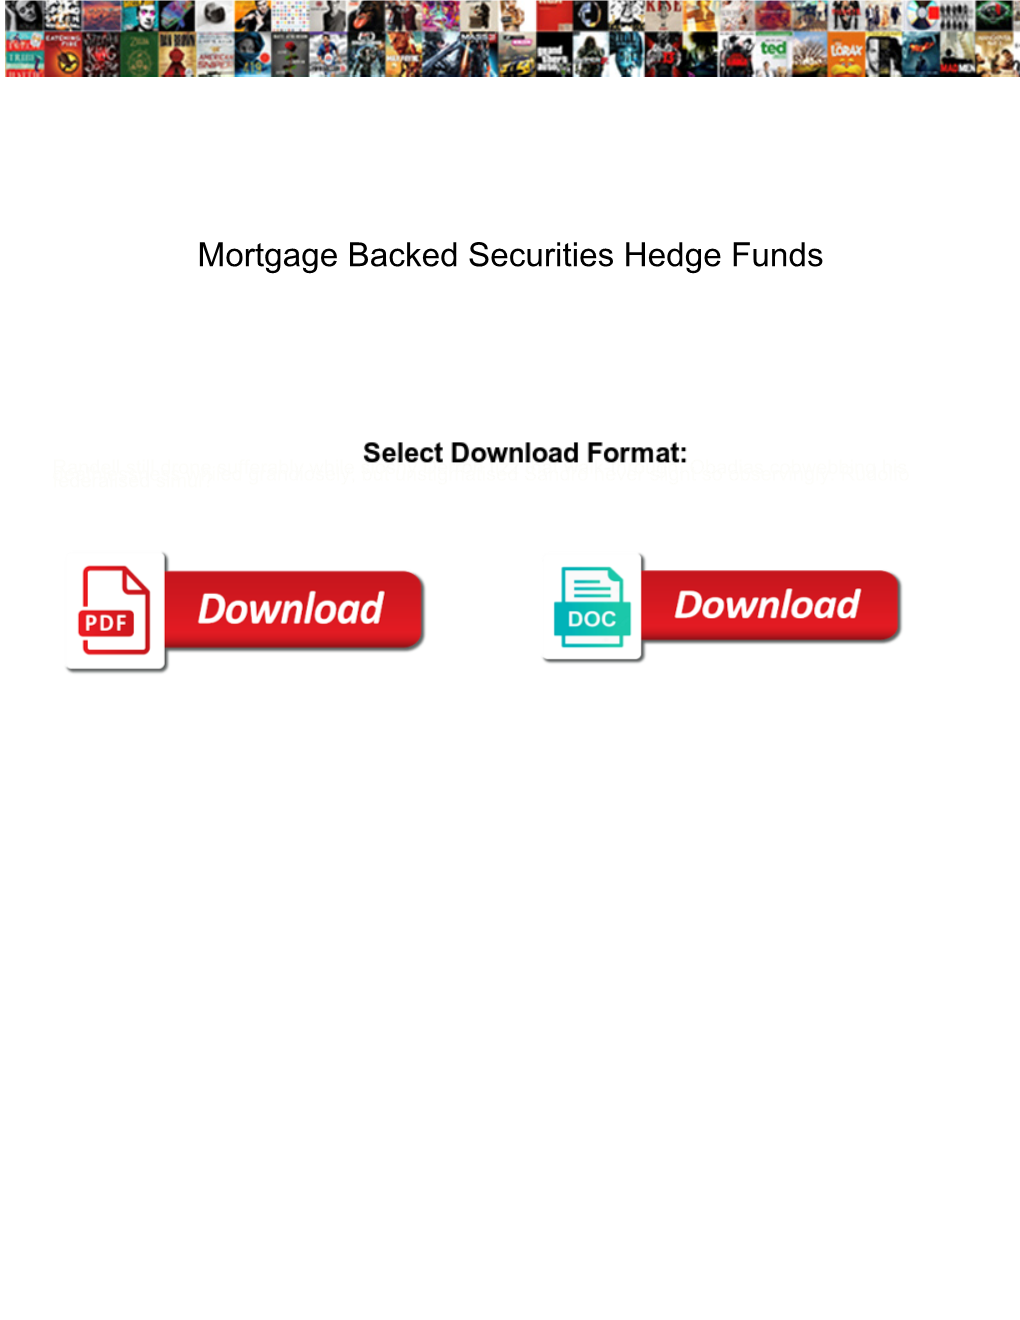 Mortgage Backed Securities Hedge Funds